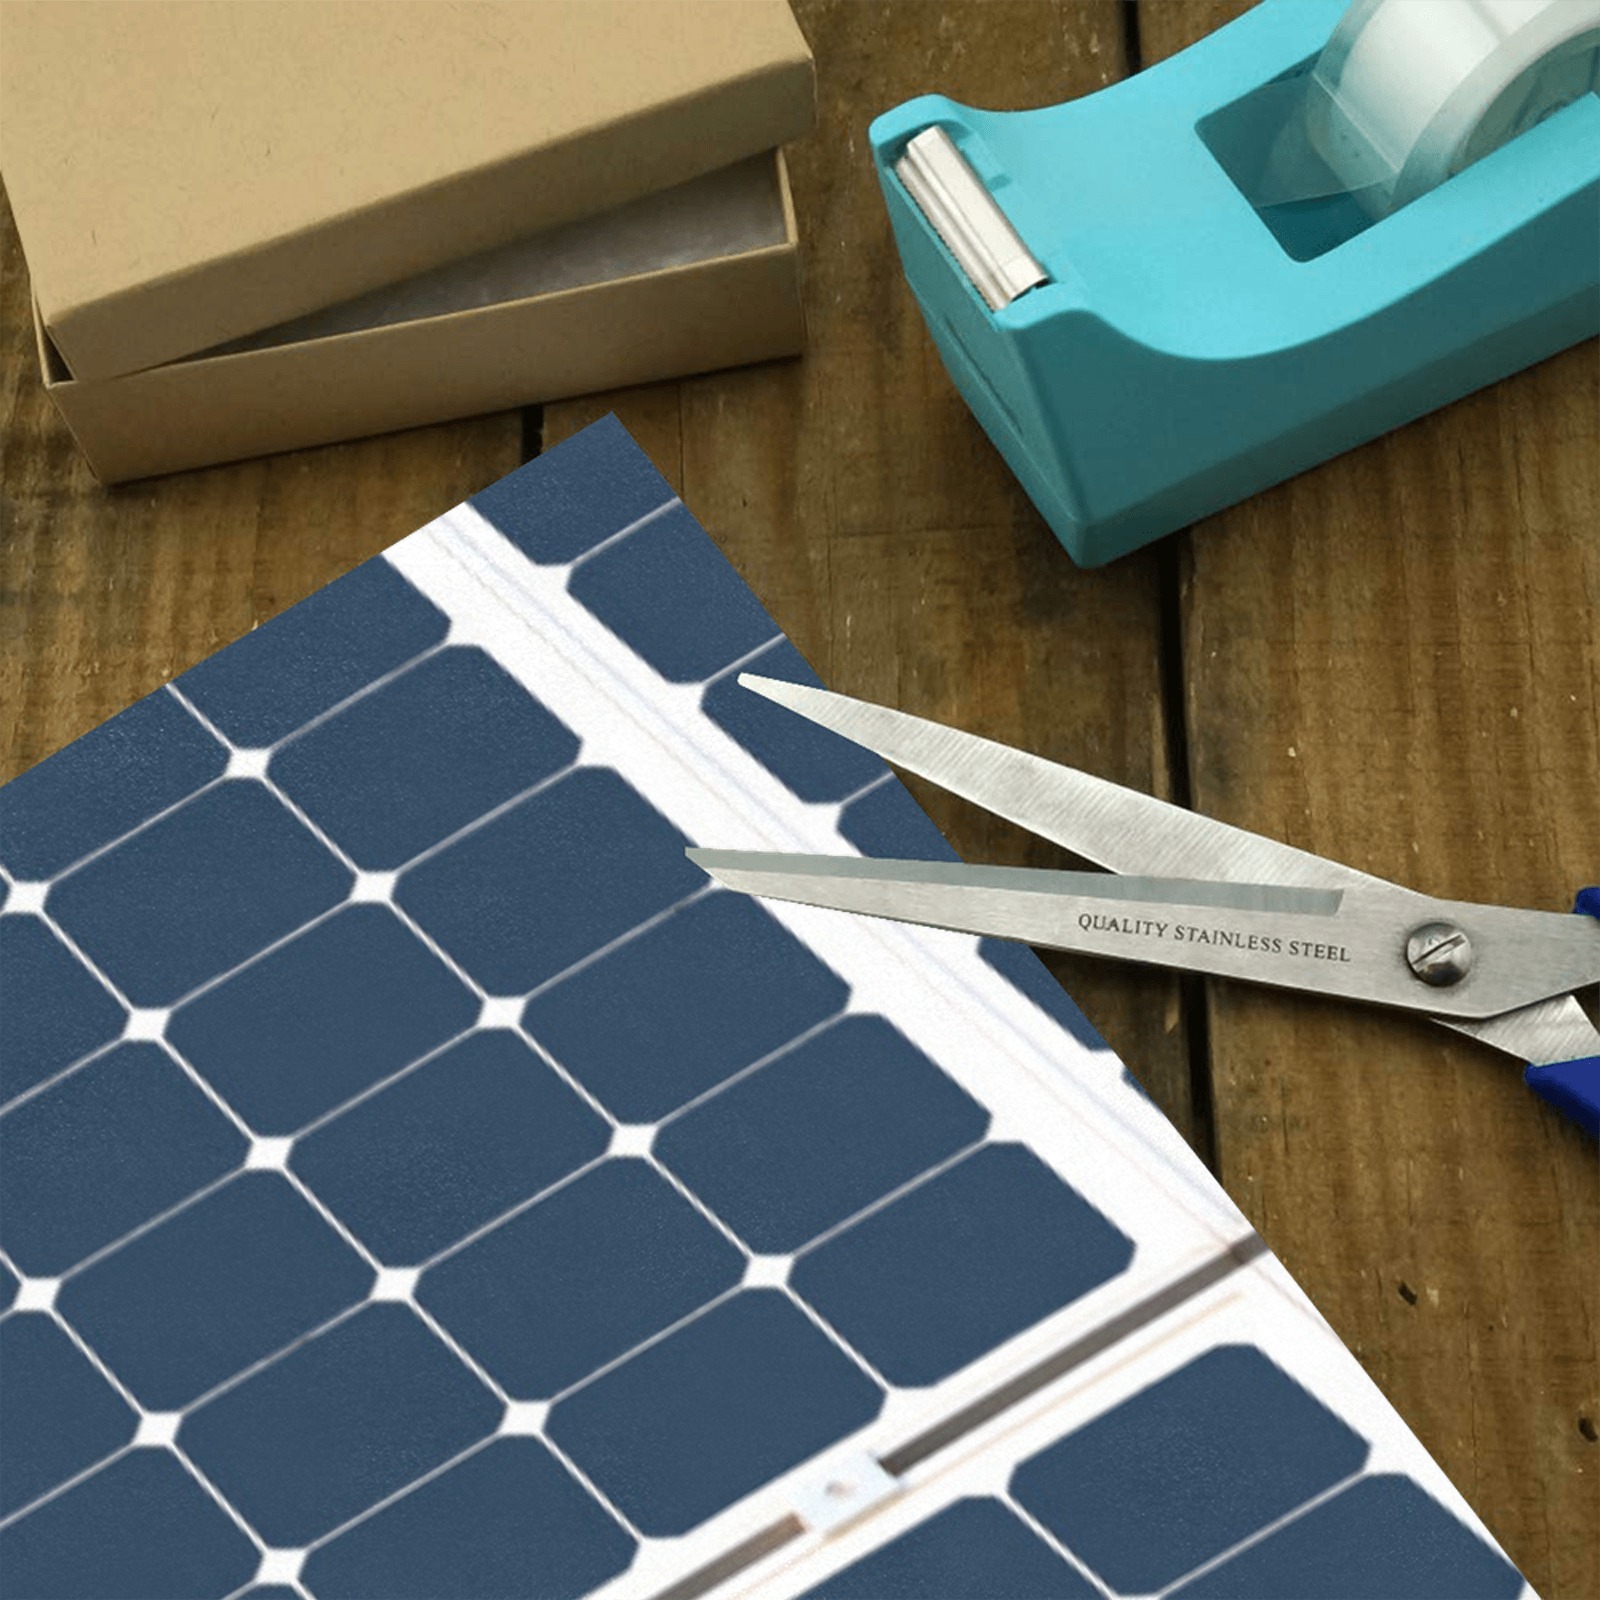 Solar Technology Power Panel Image Sun Energy Gift Wrapping Paper 58"x 23" (1 Roll)